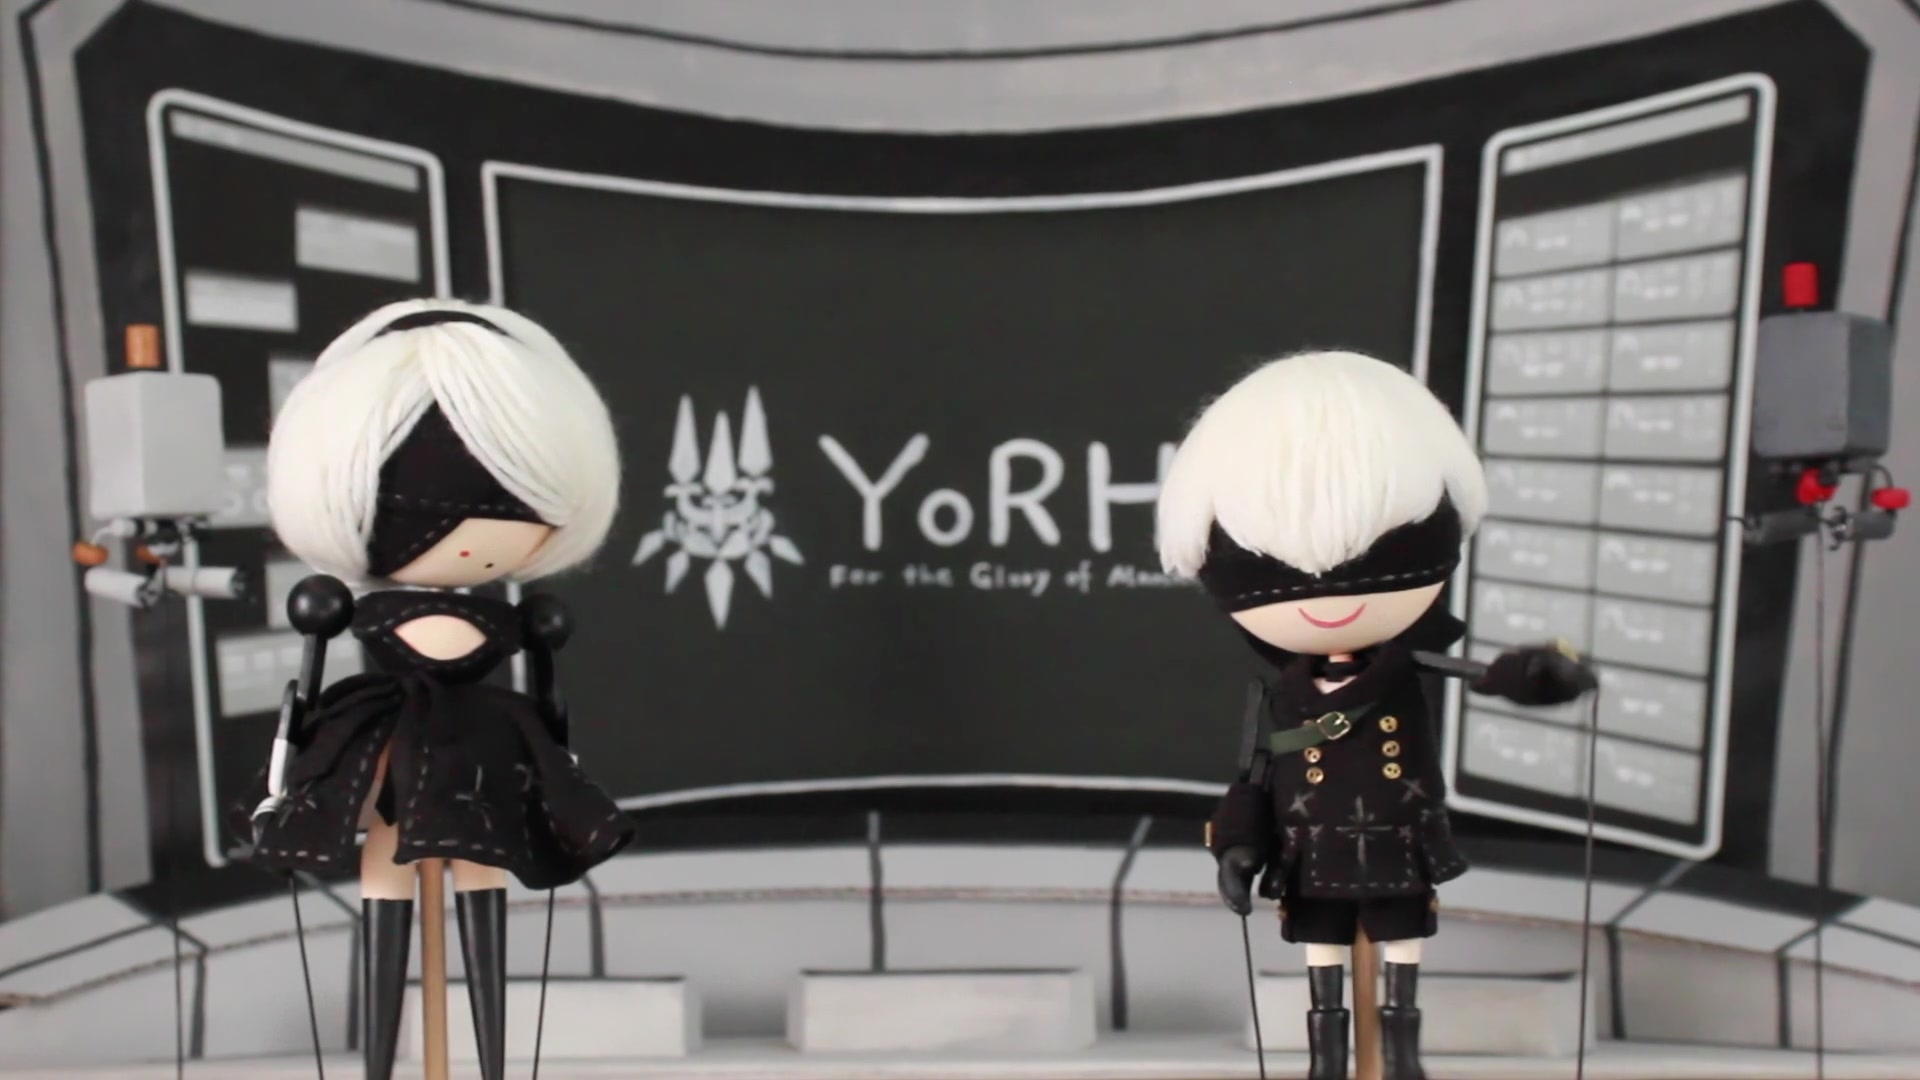 Puppets of Nier Automata protagonists 2B and 9S stand in a classroom